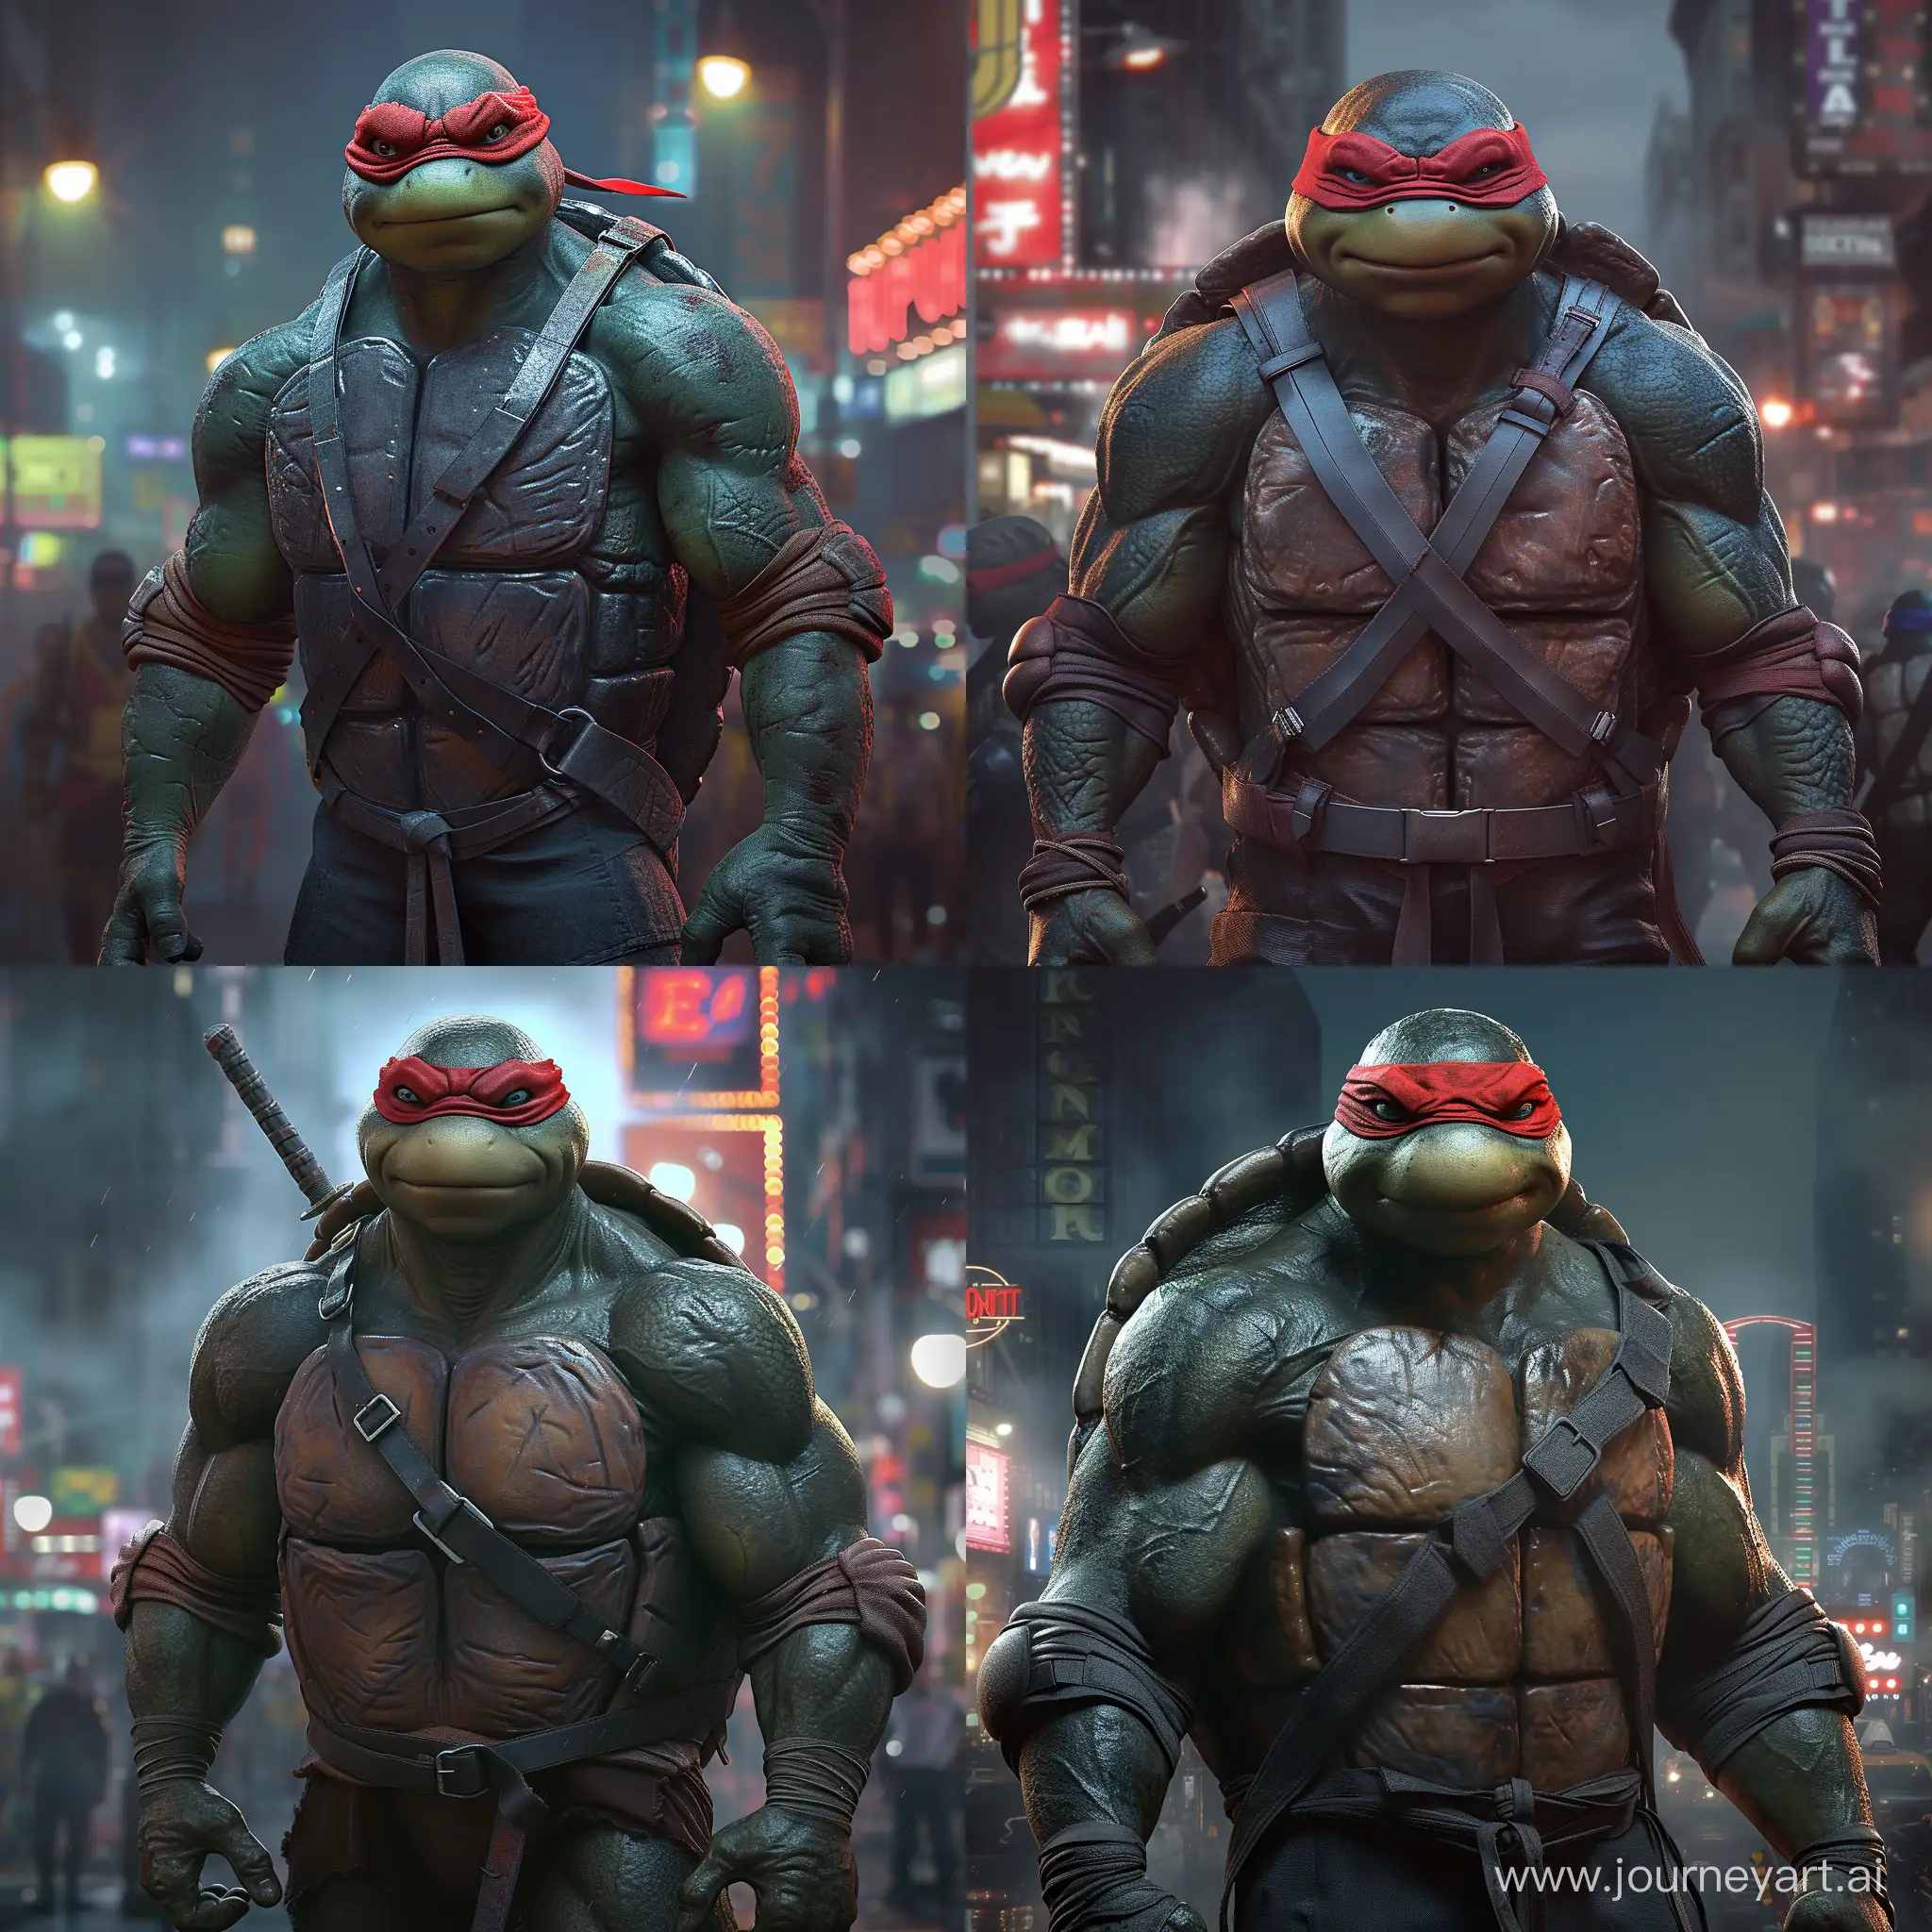 Raphael from the Teenage Mutant Ninja Turtles. This character is depicted as an anthropomorphic turtle standing with a confident posture. He is wearing a red bandana over his eyes, which is Raphael's signature color, and he has a serious, somewhat stern facial expression.

The turtle is showing muscular arms and is wearing a dark, textured suit of armor-like plating that covers his chest and shoulders, which is consistent with the modern interpretations of the Ninja Turtles' look. Various straps and belts can be seen across his torso, which might be used to carry his weapons and other gear.

The background is blurry but seems to depict a bustling urban night scene, possibly suggesting a city like New York, which is the traditional setting for the Teenage Mutant Ninja Turtles series. The lighting is dim and atmospheric, with neon lights glowing in the distance, adding to the gritty urban ambiance of the scene.

Overall, the image appears to be a high-quality rendering or possibly a high-resolution photograph of a well-crafted costume or figure, designed to look very lifelike and detailed. The attention to texture and lighting enhances the realism of the character's appearance.